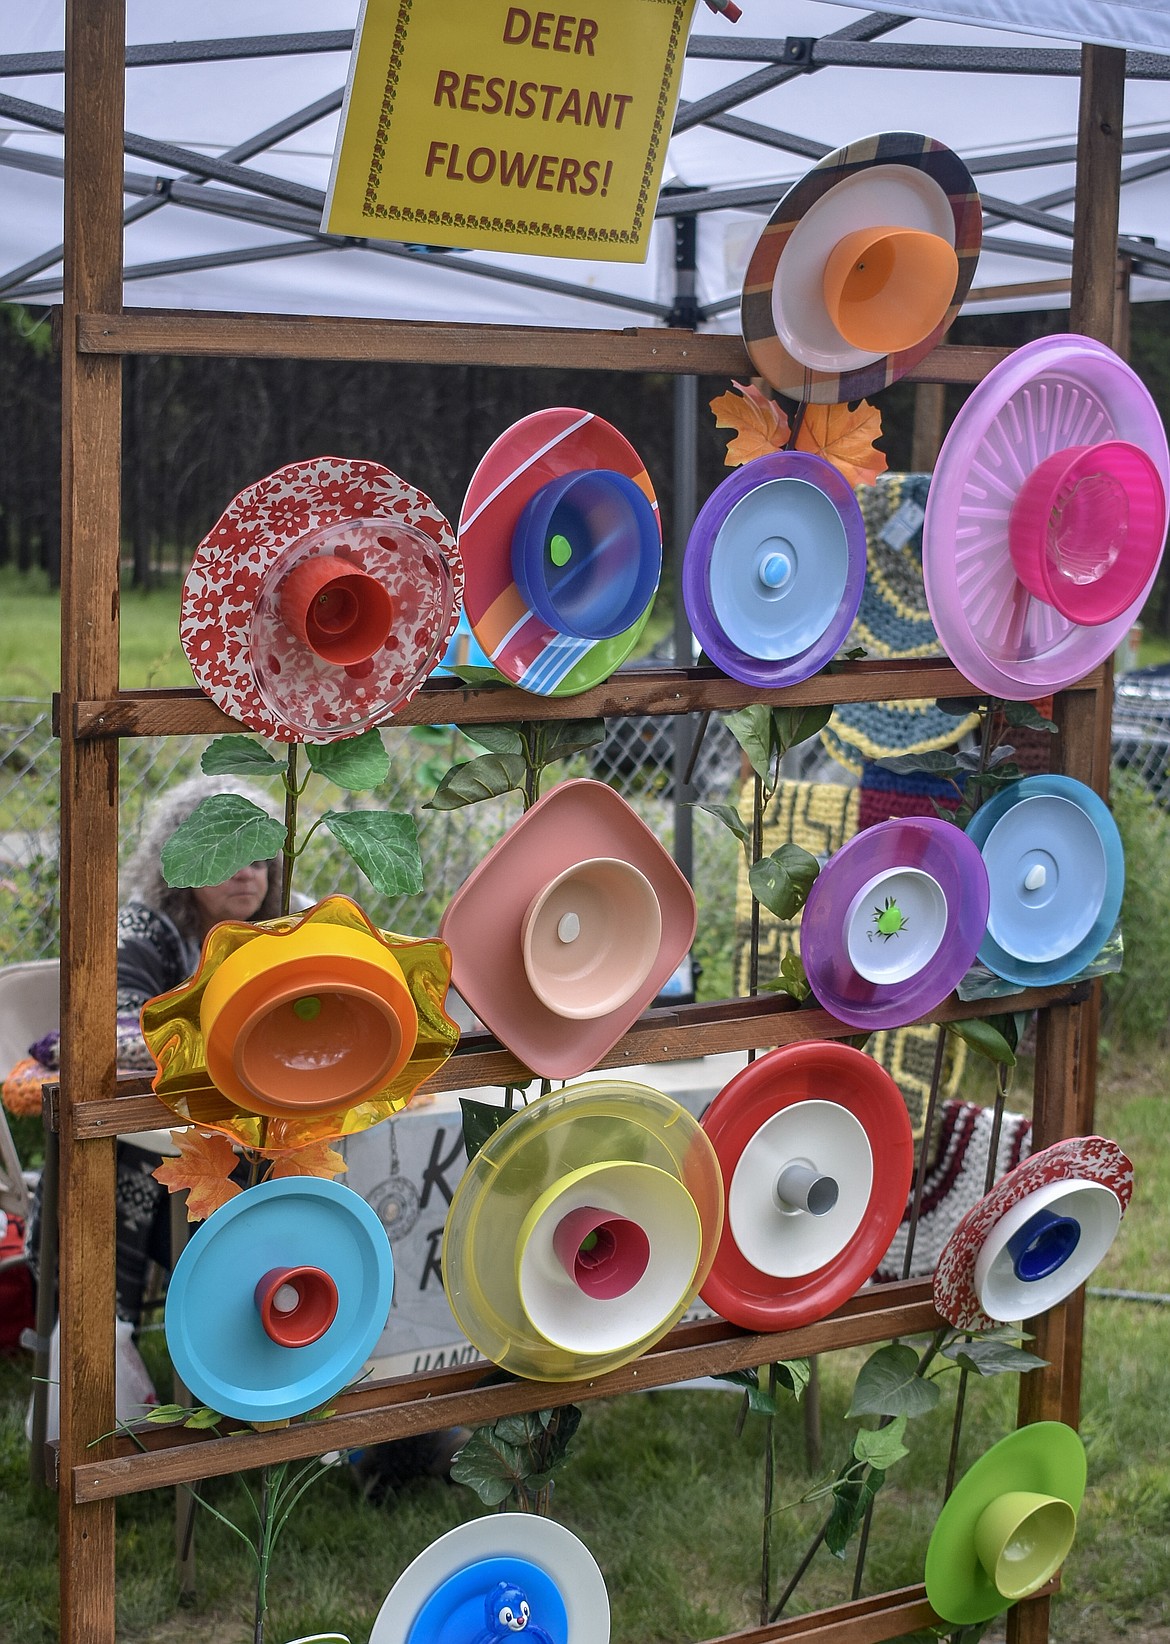 Pat Shirk&#146;s &#147;deer resistant flowers&#148; on display at the sixth annual Yaak School Arts and Crafts Fair Saturday, June 30. The flowers were sold in addition to her woven items, and Shirk said she enjoys coming to the Yaak for the community and to support the school. 
(Ben Kibbey/The Western News)